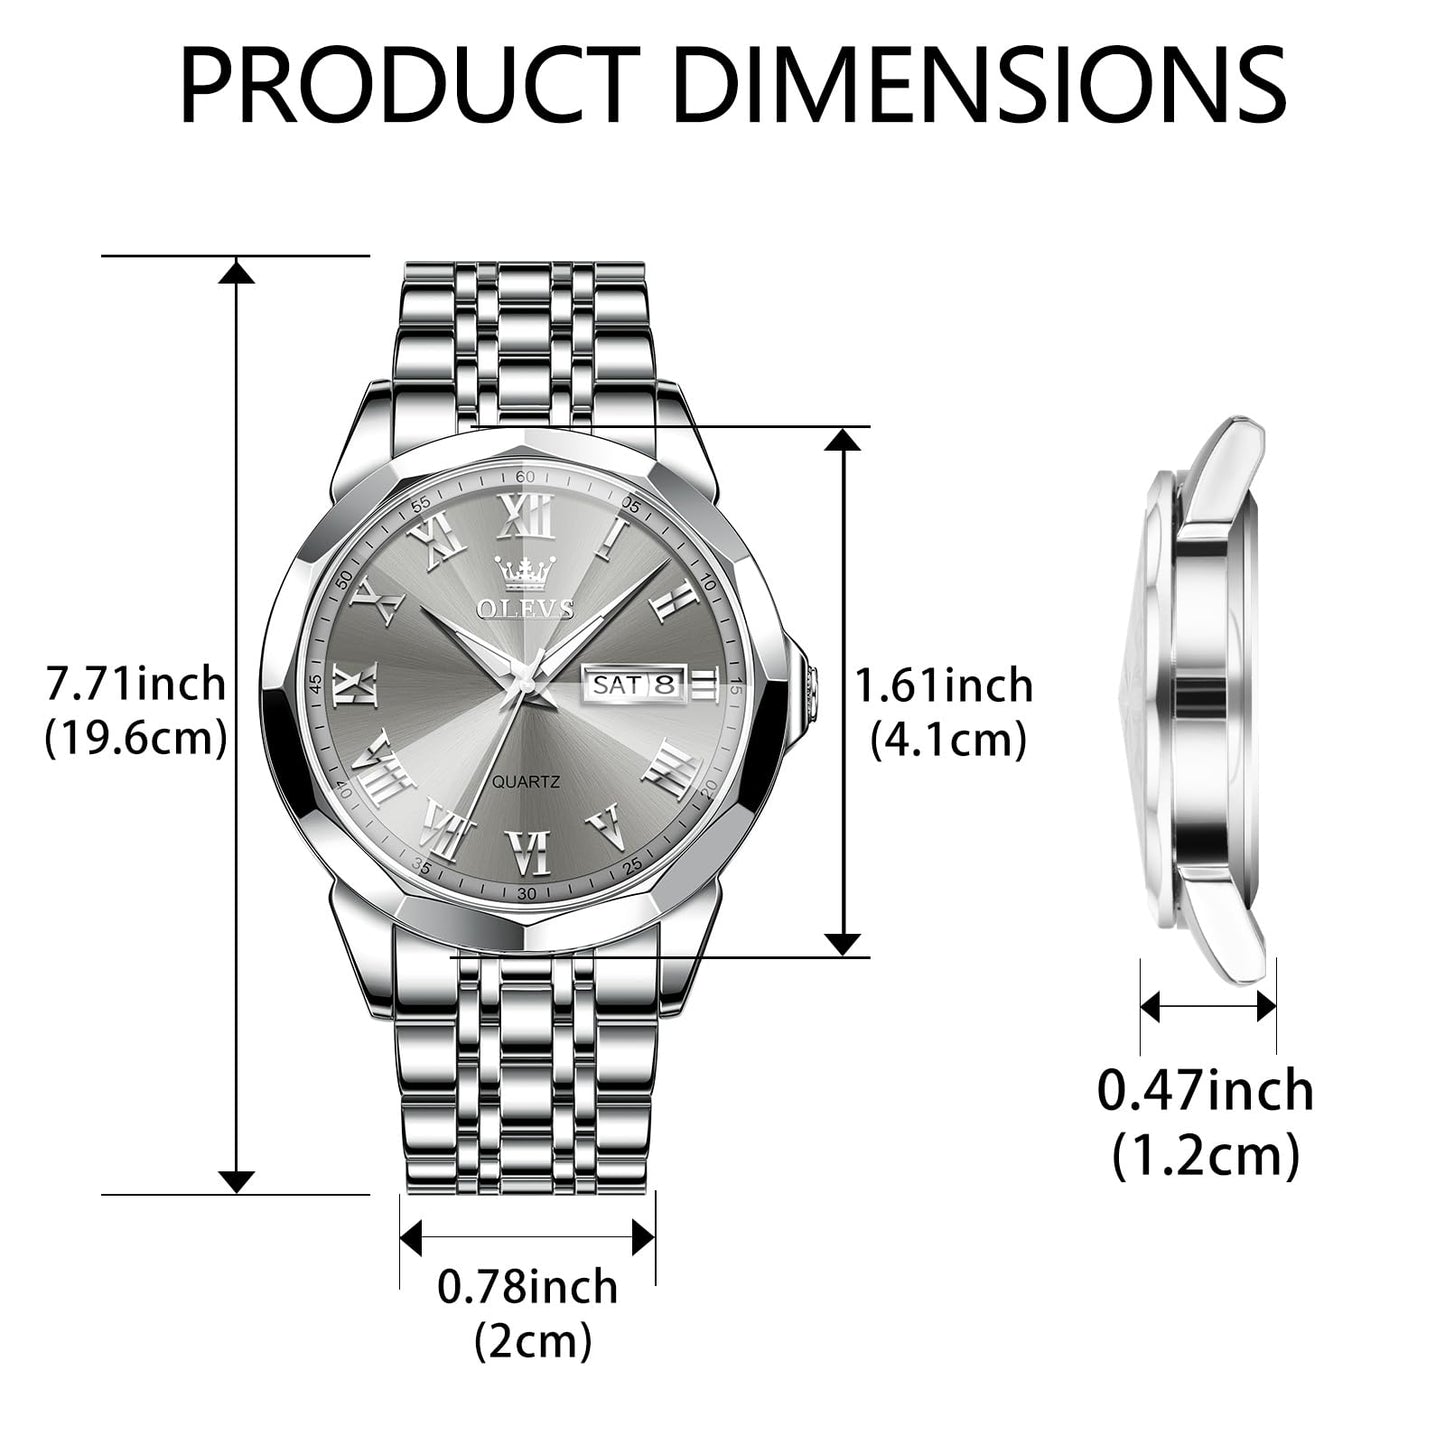 OLEVS Mens Watches Grey Watch for Men Silver Watches Luxury Men Stainless Steel Watches Waterproof Analog Quartz Large Dial Mens Wrist Watches Date Day Dress Reloj de Hombre Roman Numerals